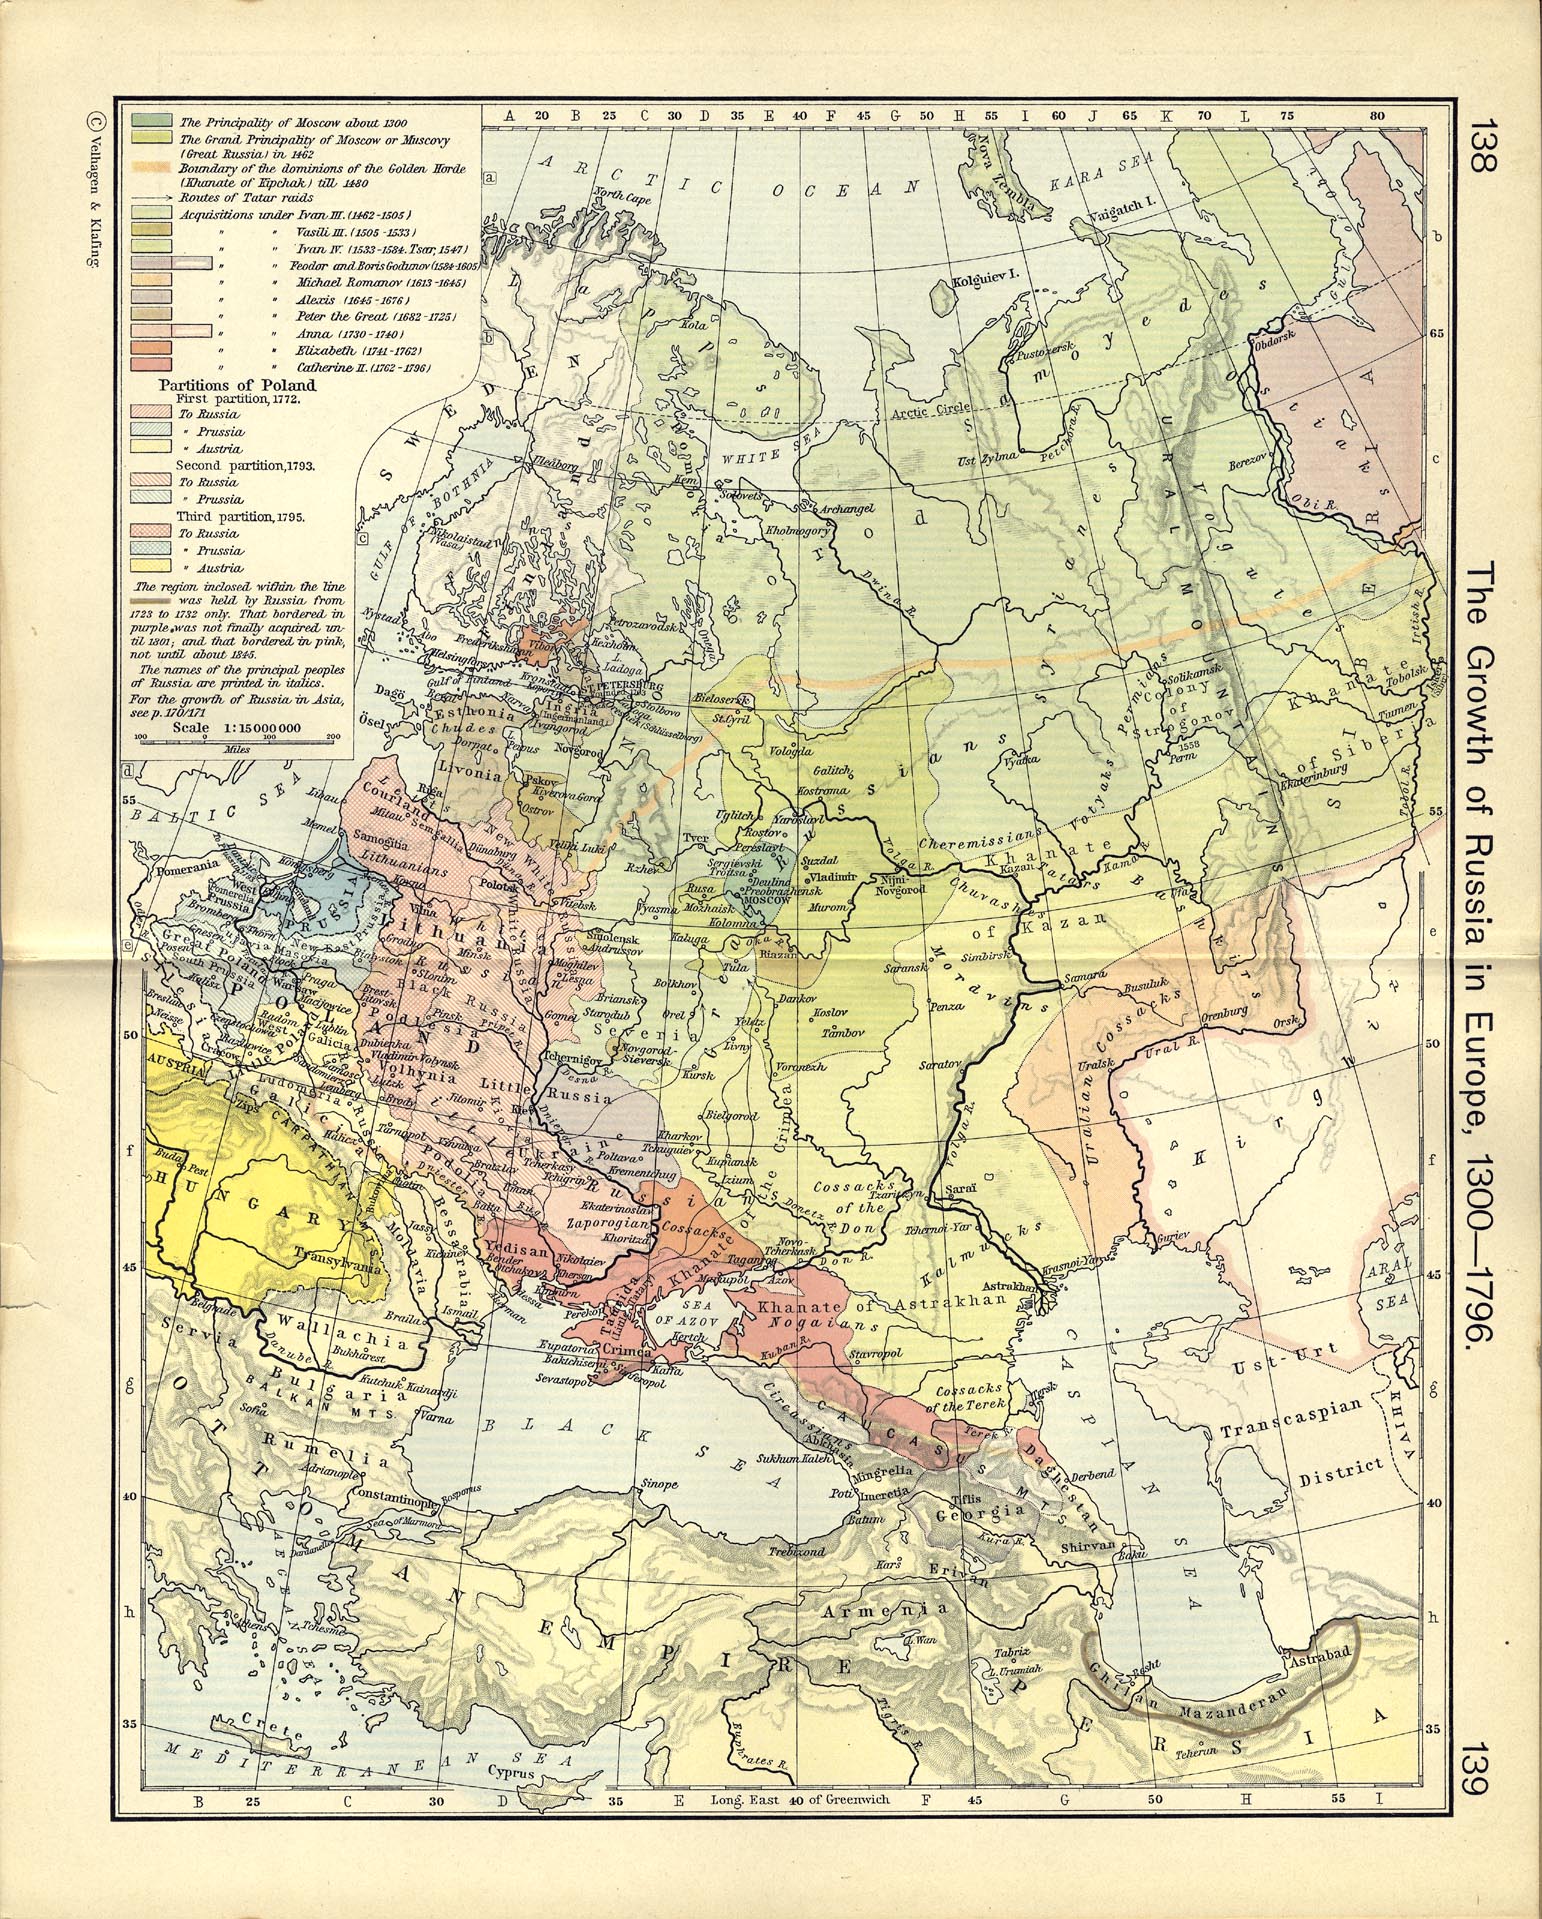 The Growth of Russia in Europe, 1300-1796. Source: unknown.